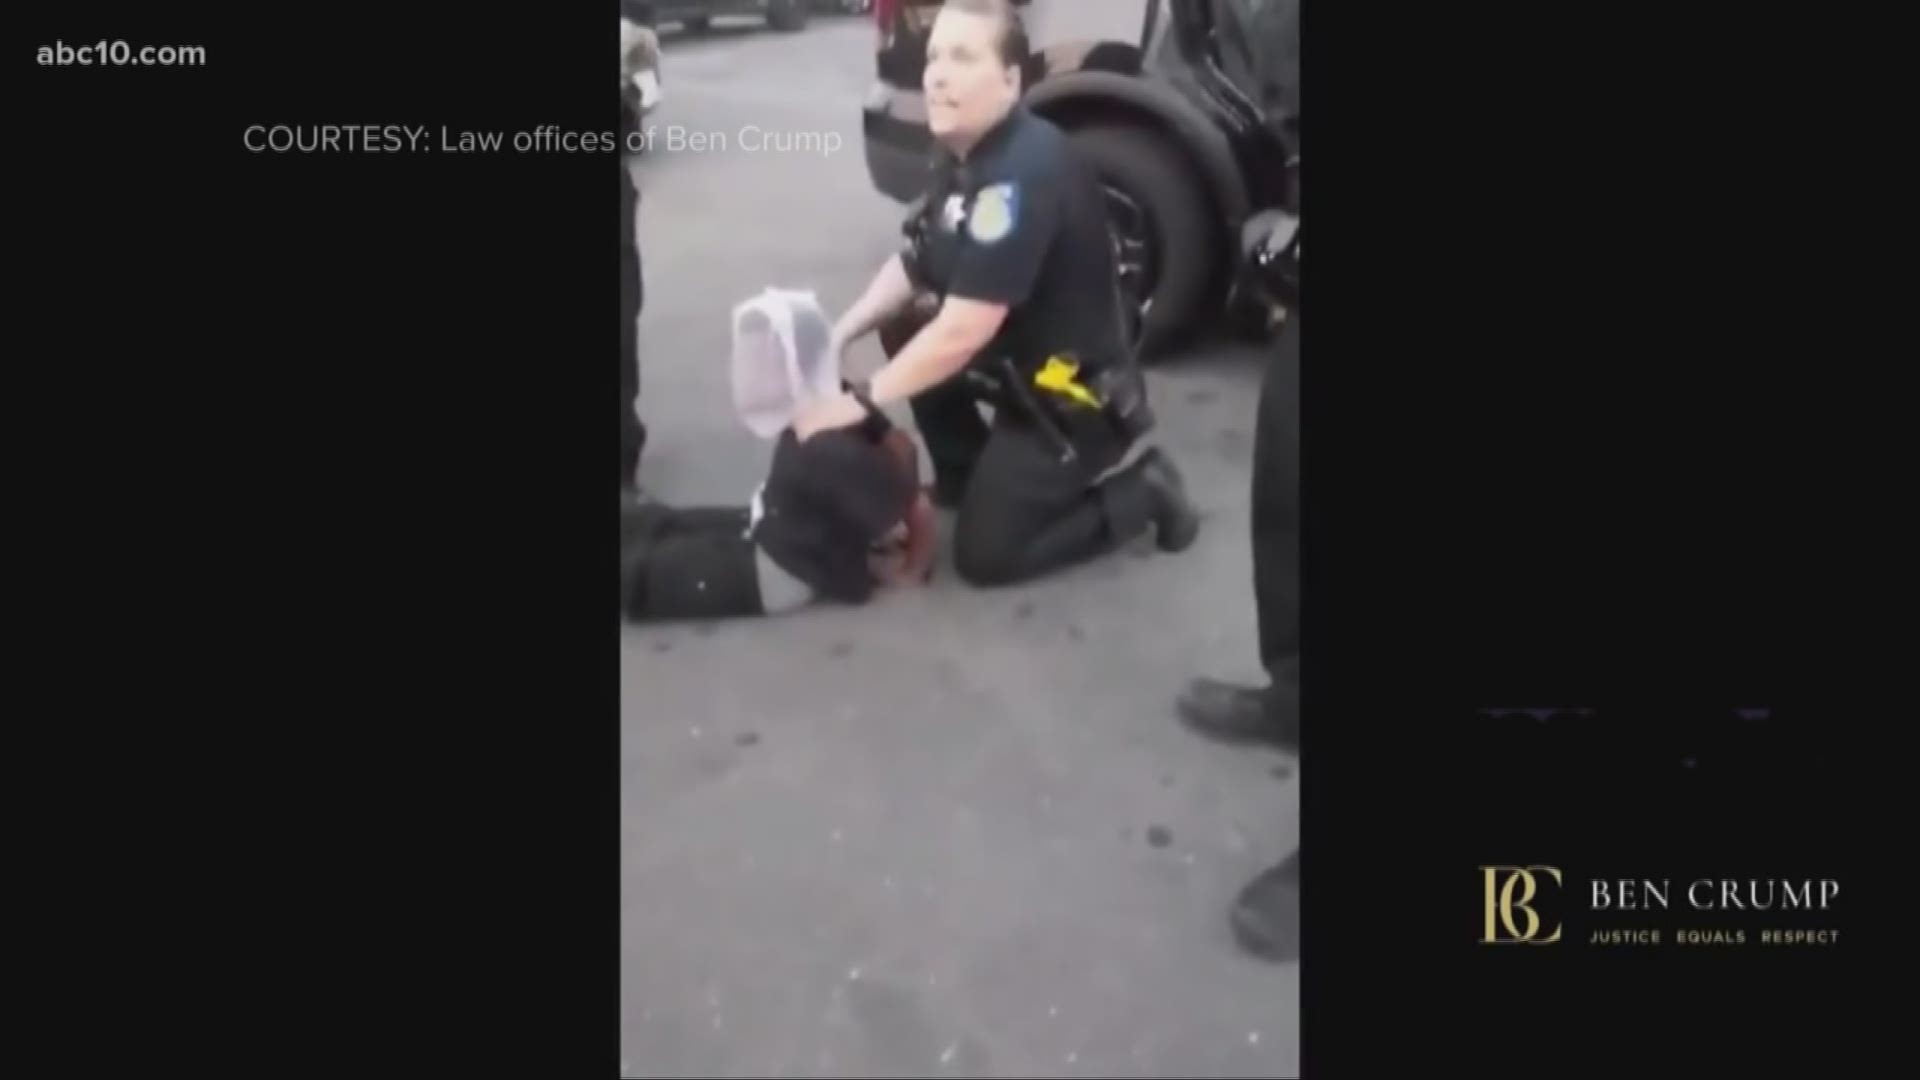 The Sacramento Police Department is responding after video of young boy’s arrest has gone viral. The video shows a 12-year-old boy being detained by officers in Del Paso Heights, with a white “spit bag” placed over his head.